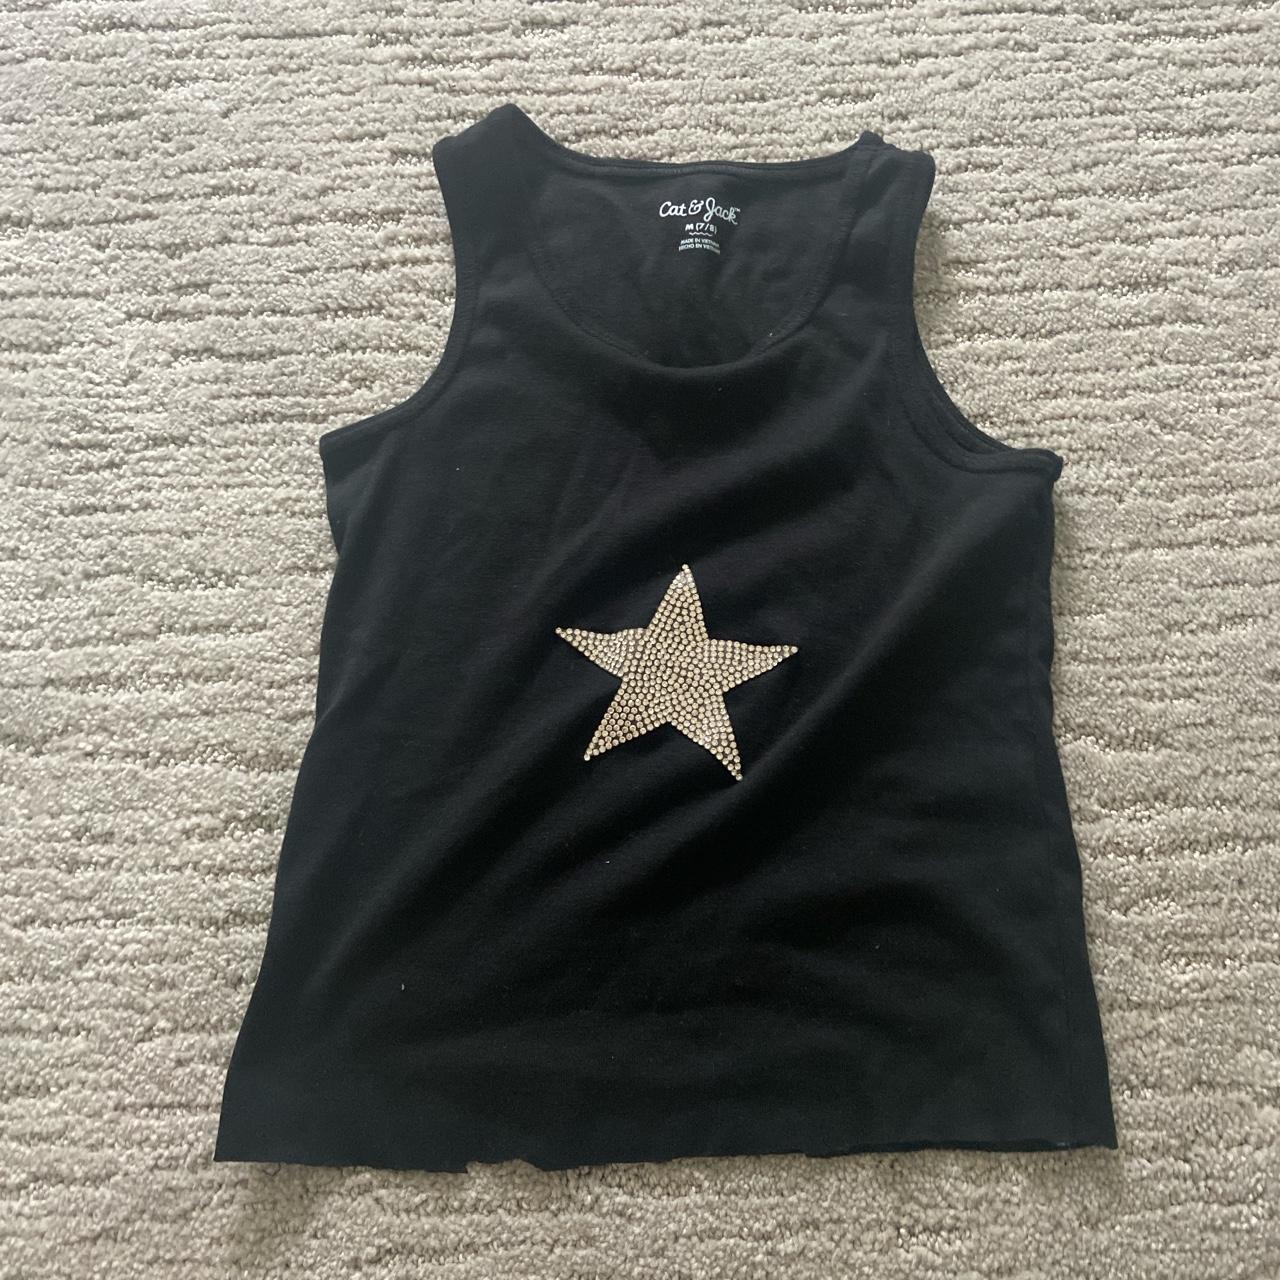 Target Women's Black and Silver Vest